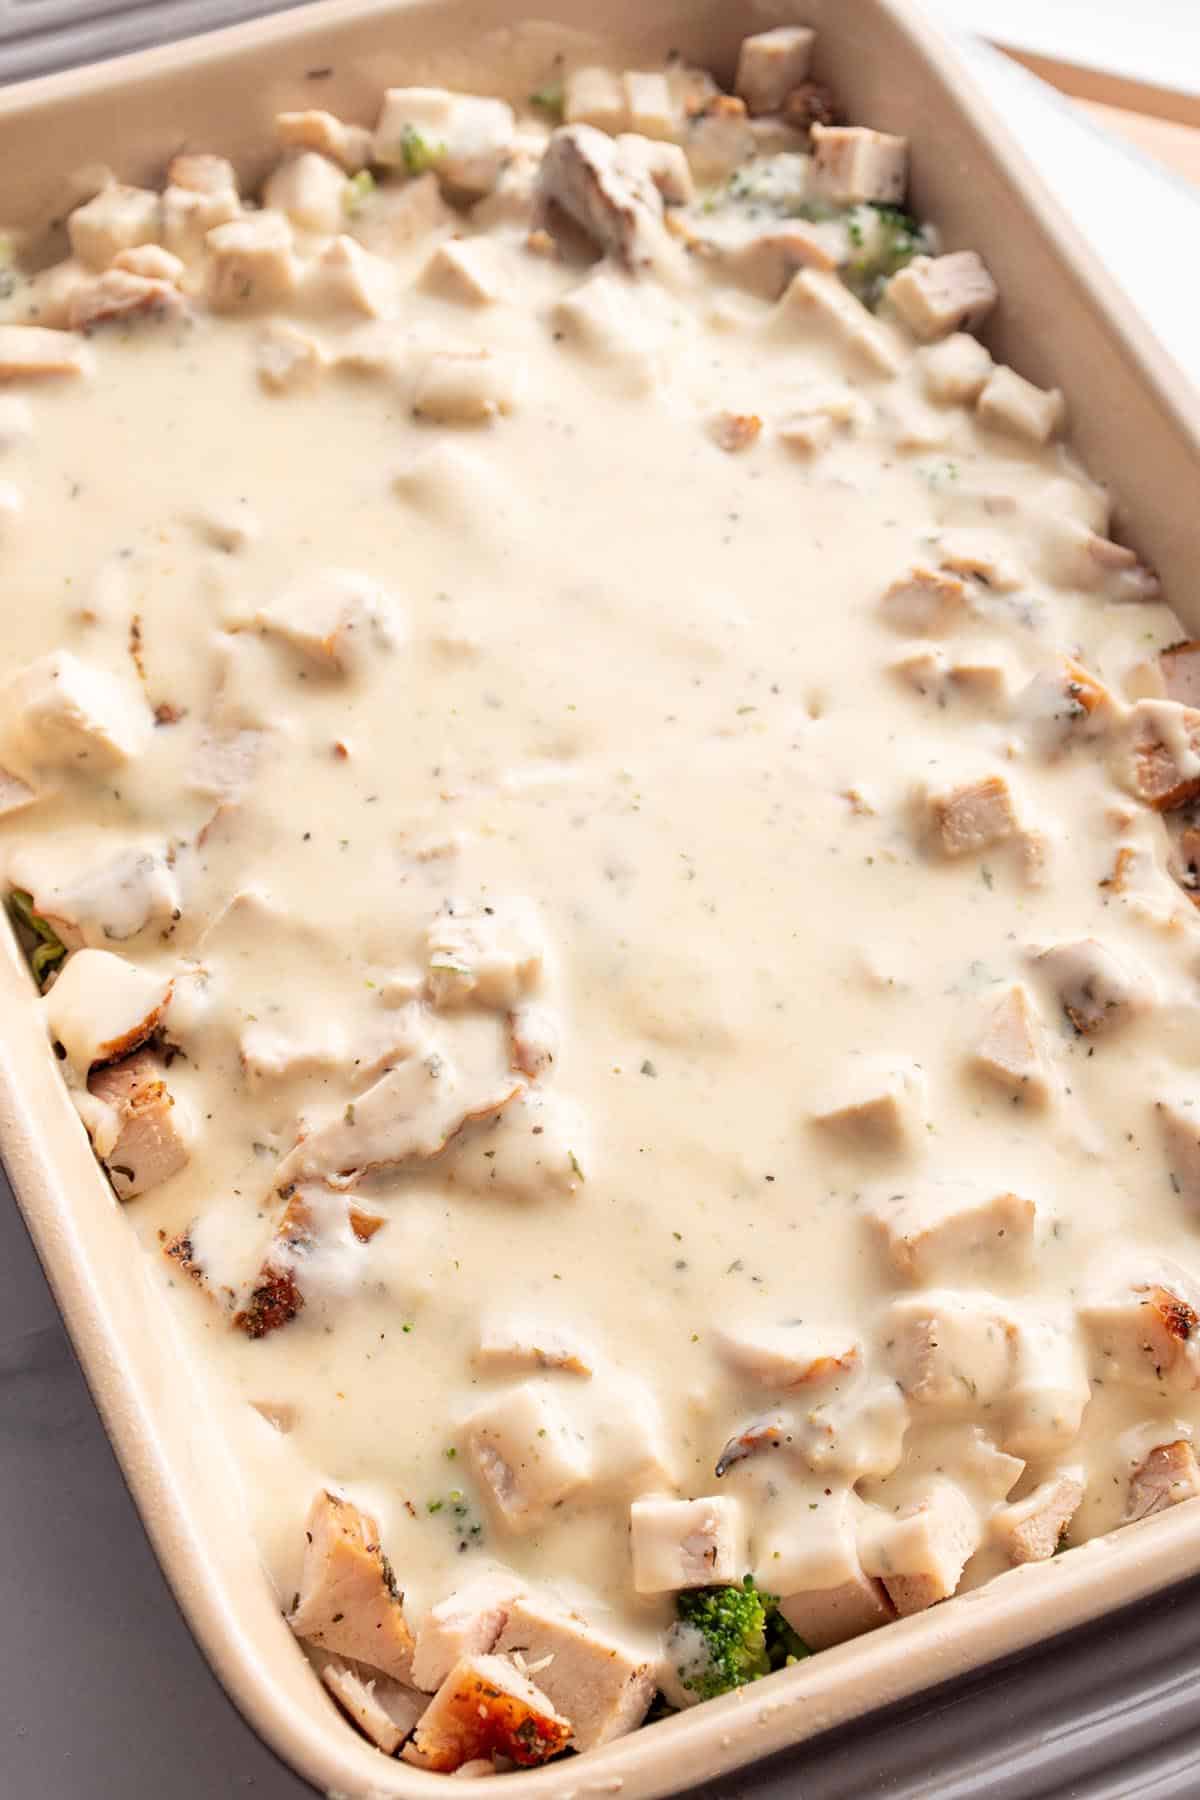 A baking dish with layers of broccoli, turkey, and a creamy sauce.